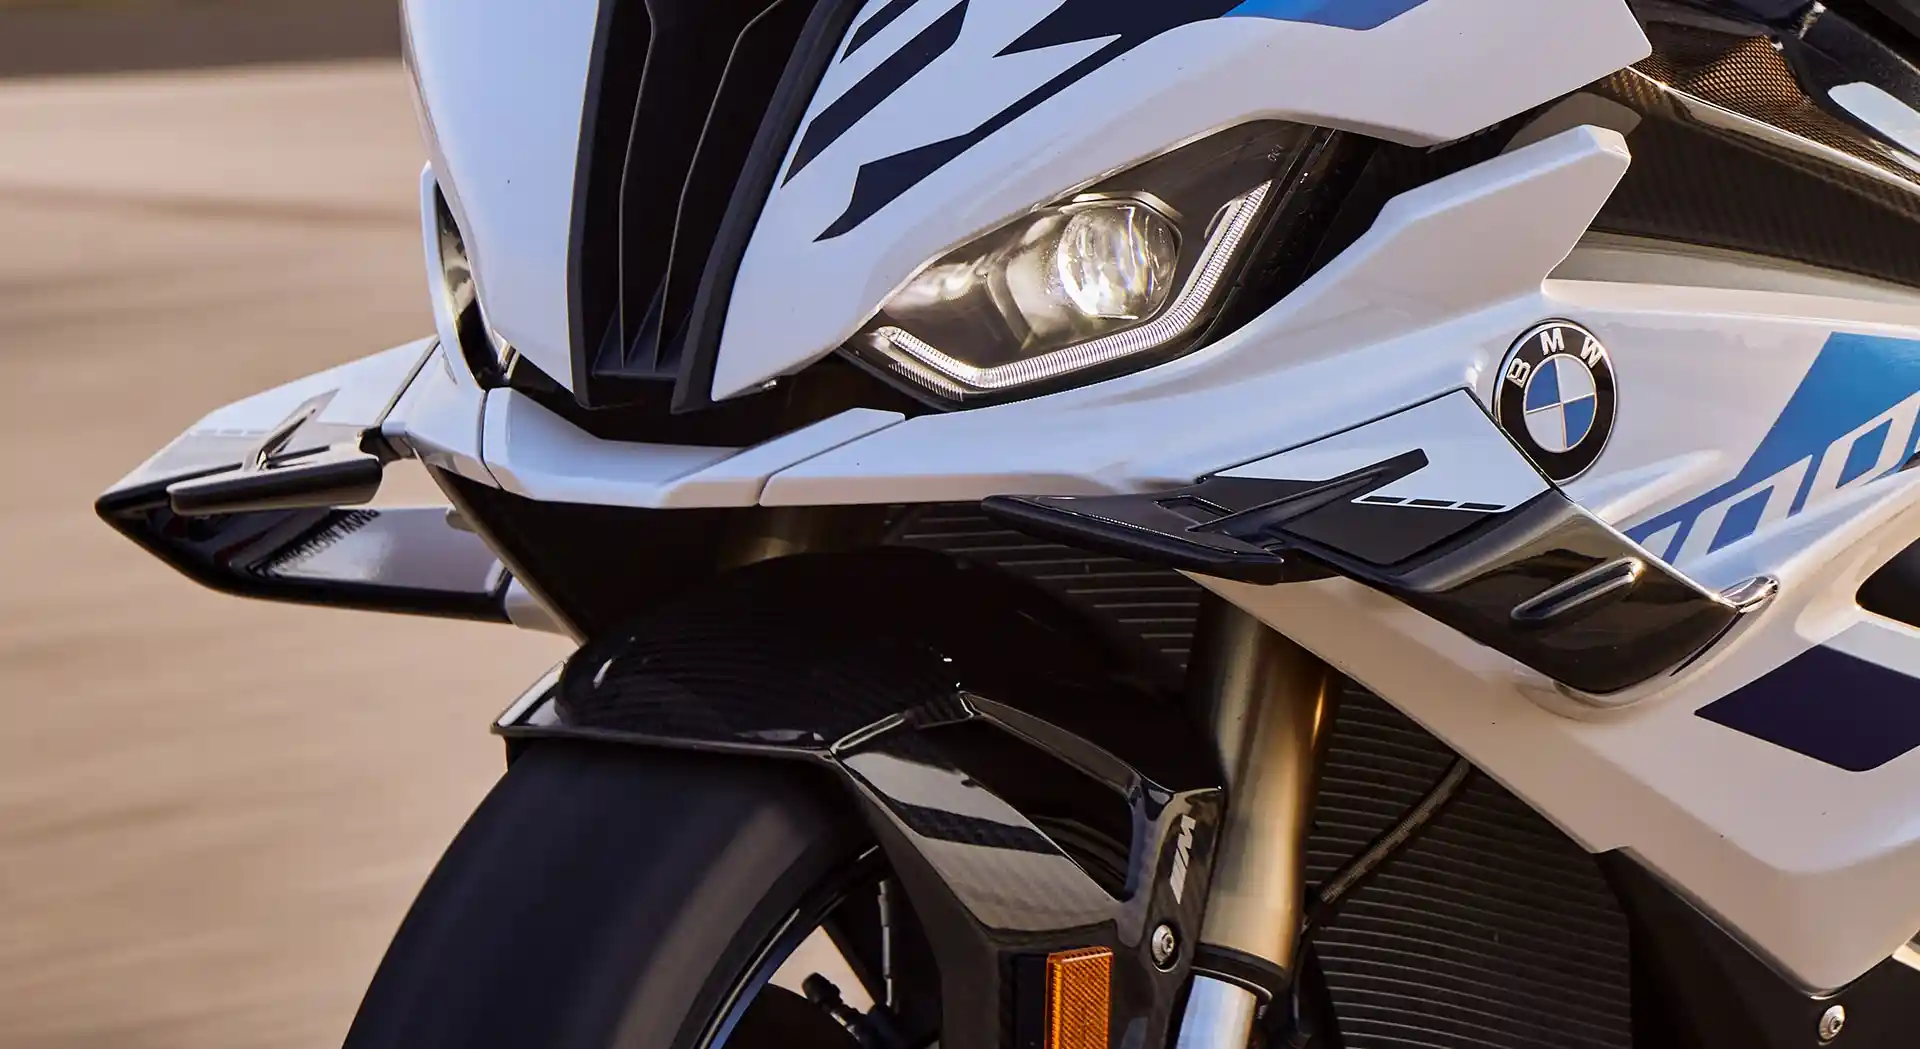 Patented! BMW Develops Active Aero Winglet on Superbike S 1000 RR